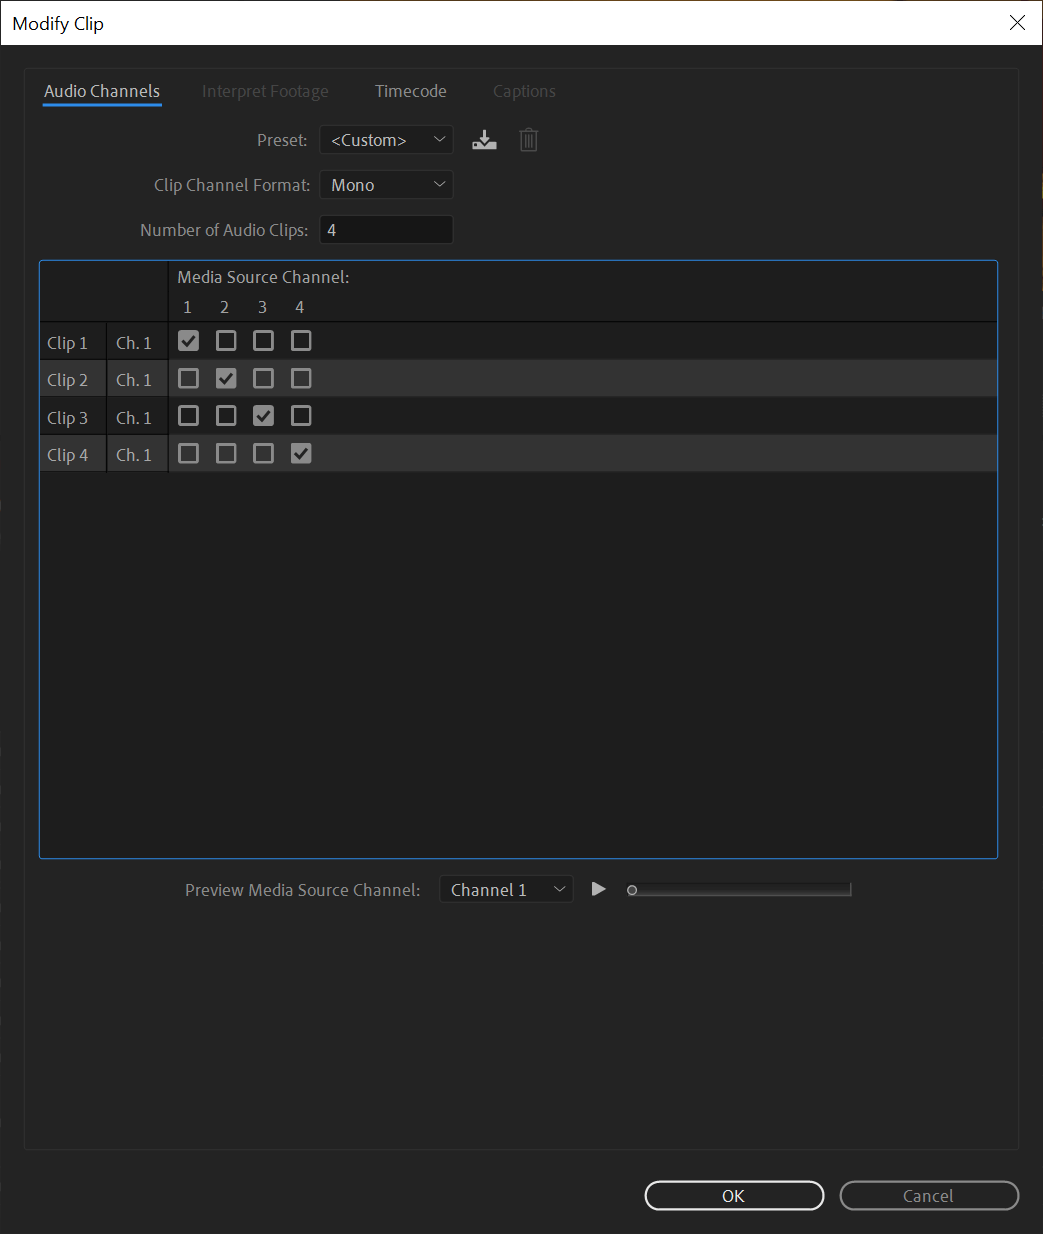 A clip’s Audio Channels options window, before modification